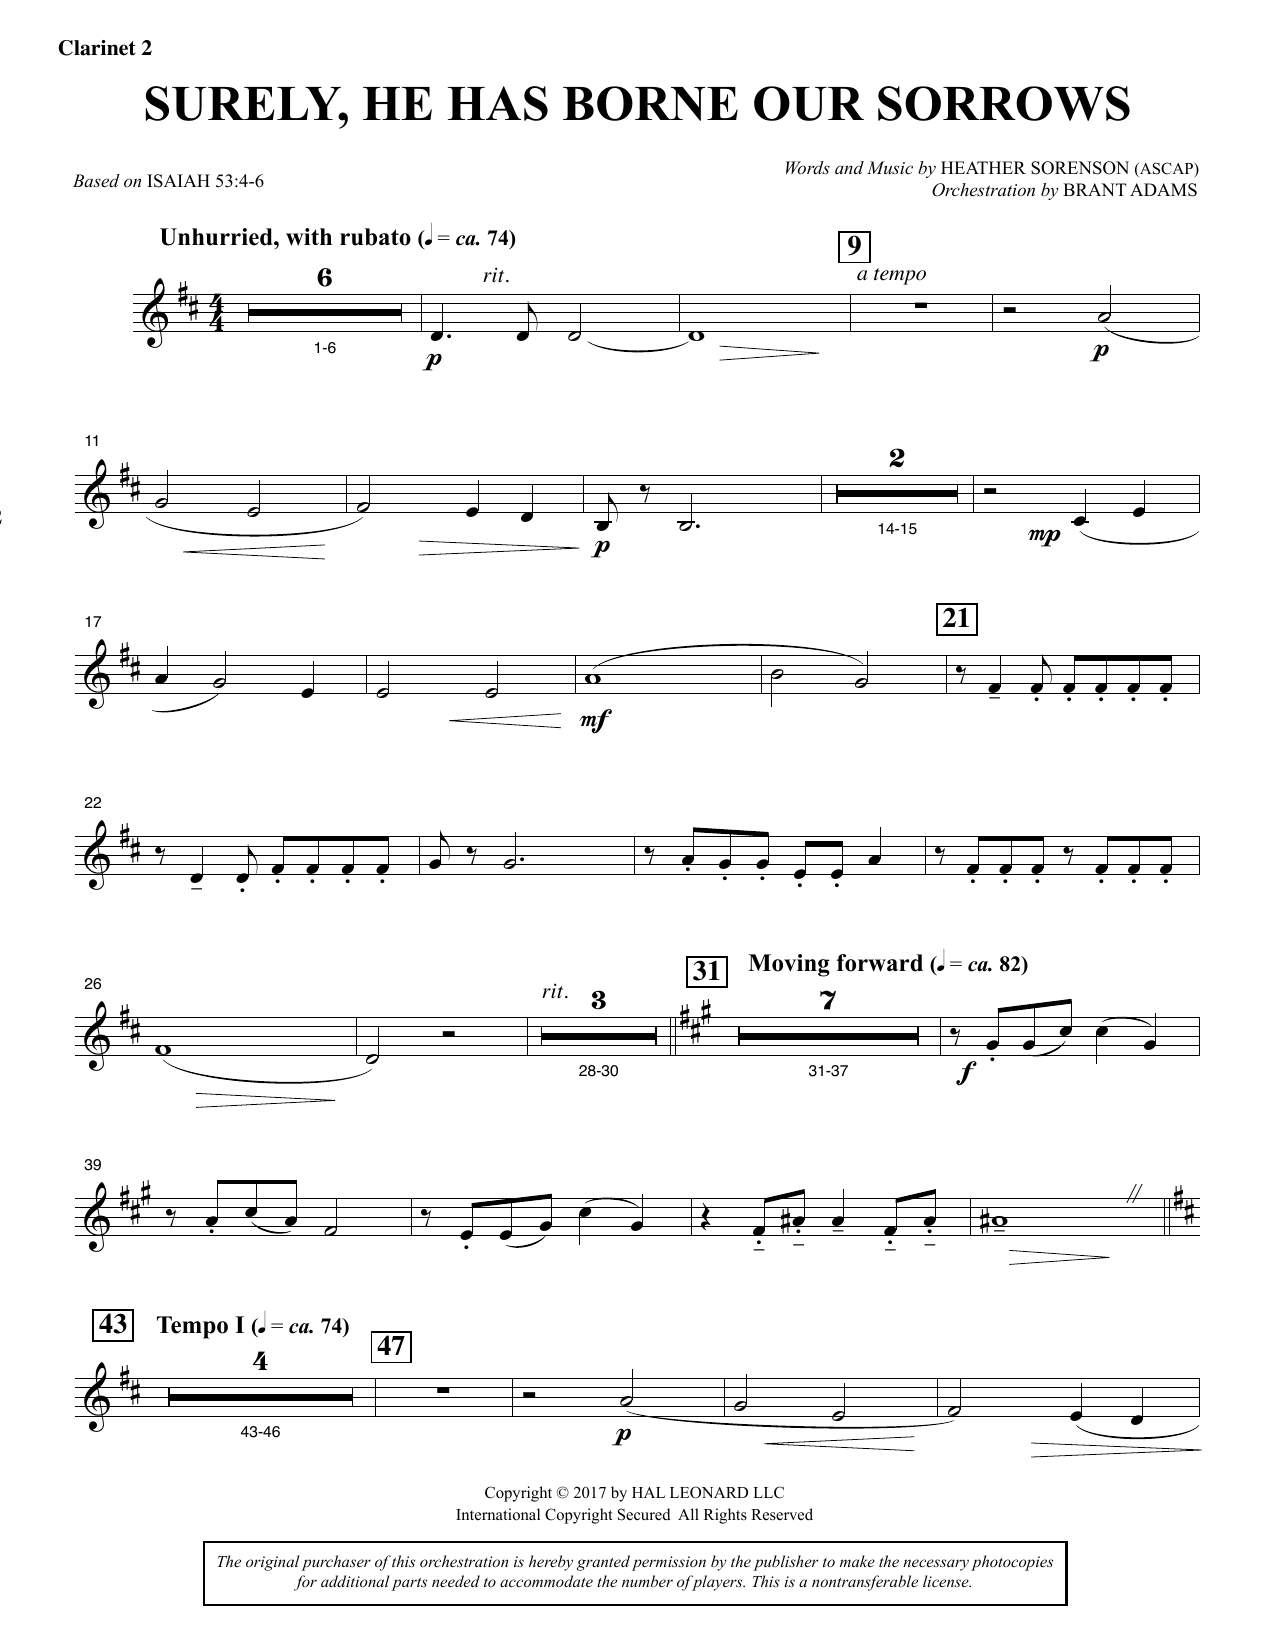 Download Heather Sorenson Surely, He Has Borne Our Sorrows - Bb C Sheet Music